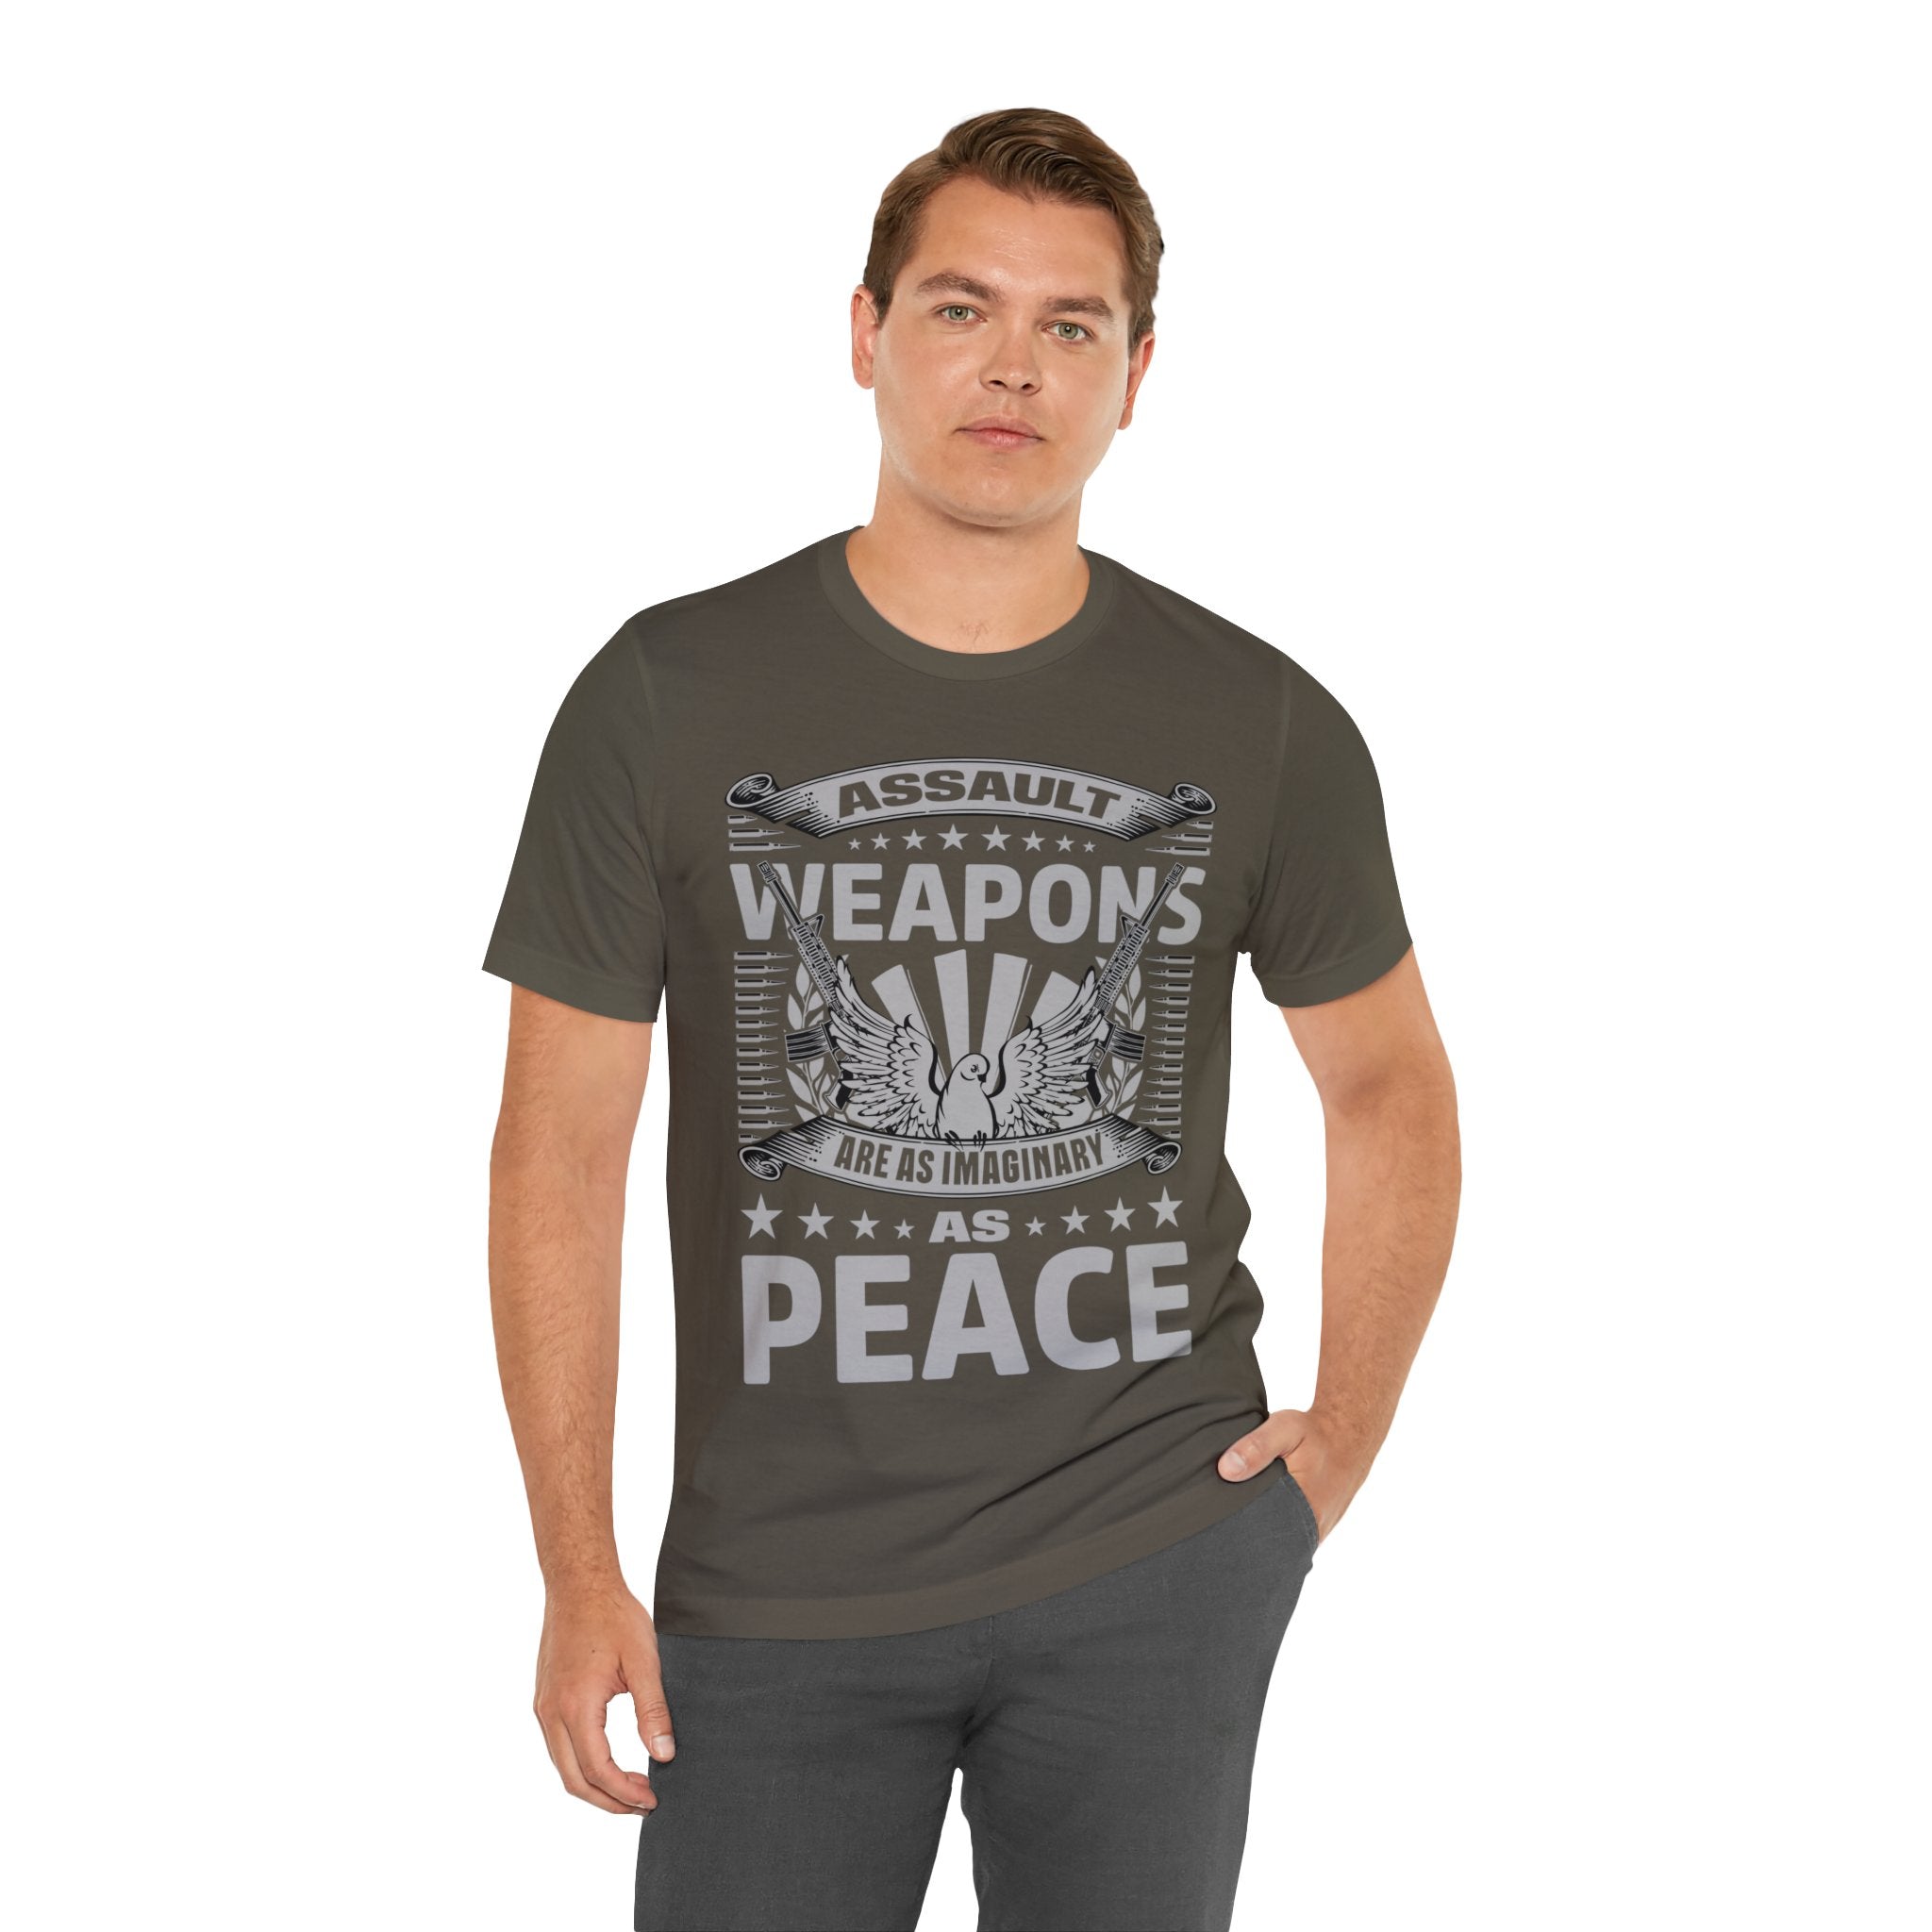 Assault Weapons Imaginary as Peace